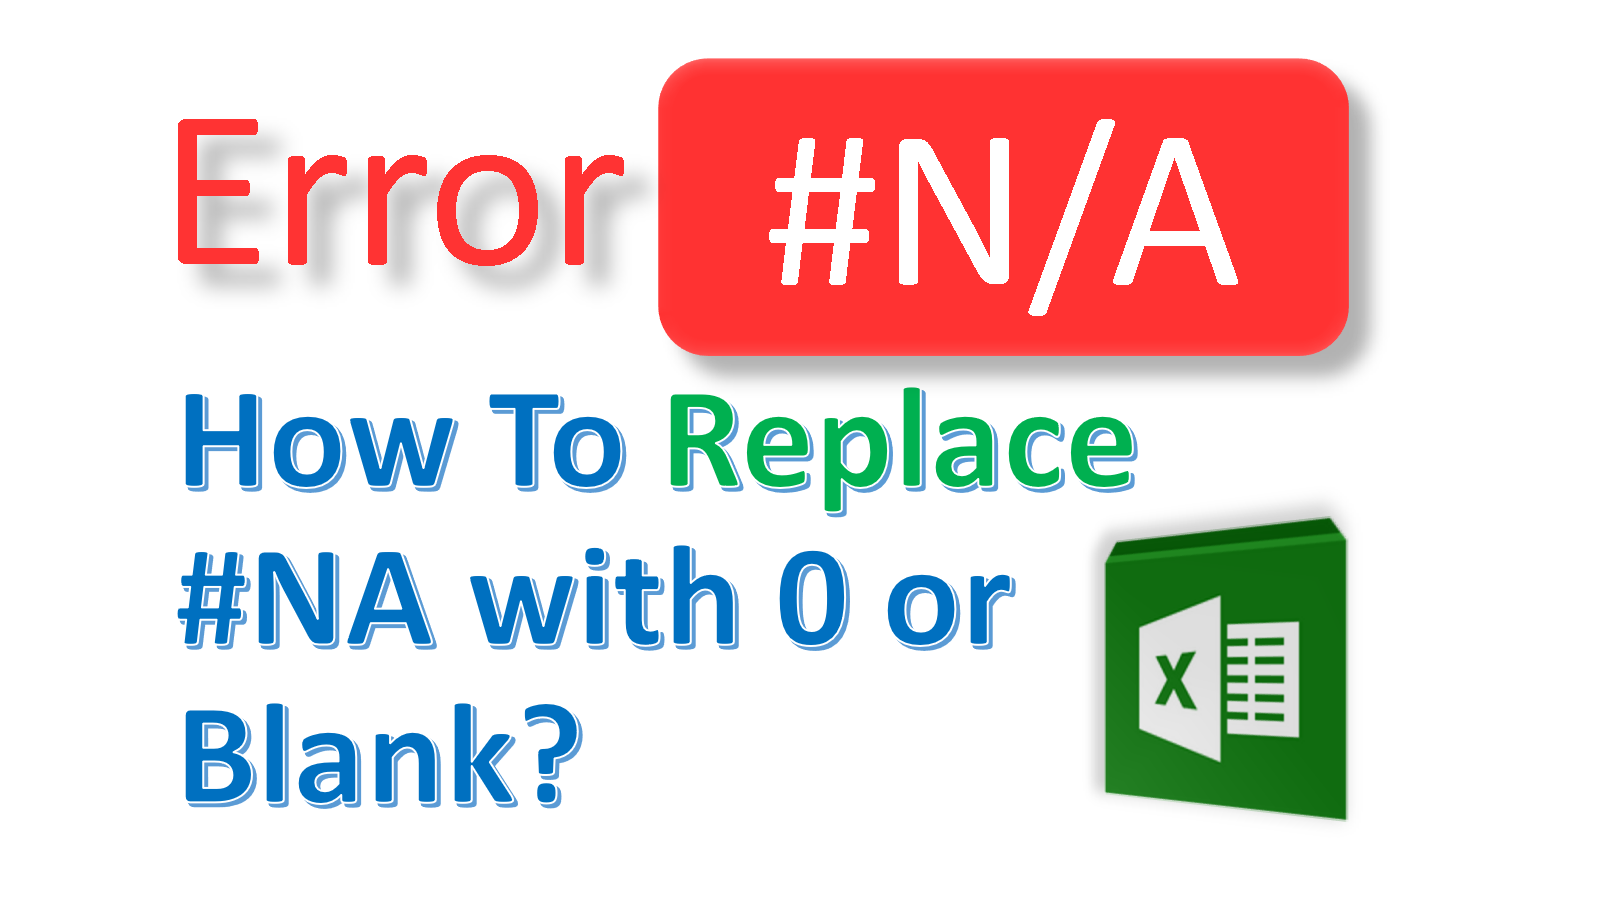 How to Replace #N/A in Excel with 0 or blank - using Formula?